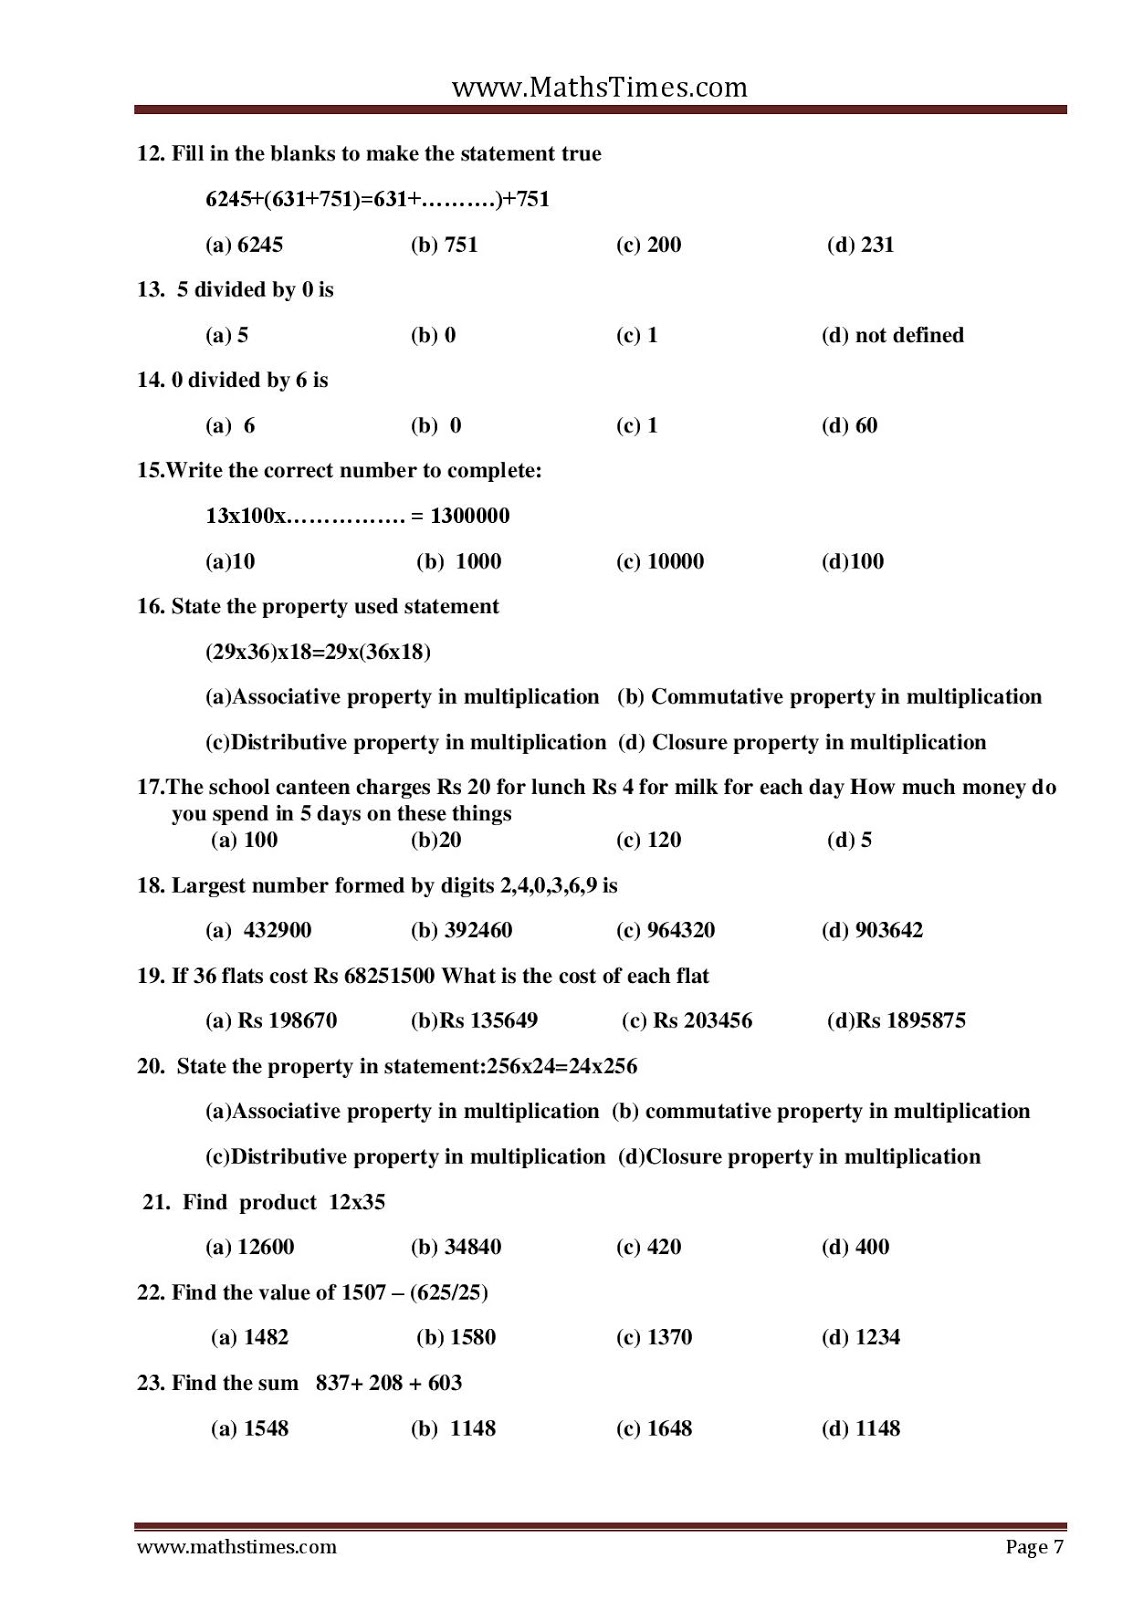 Worksheet For Whole Numbers Class 6